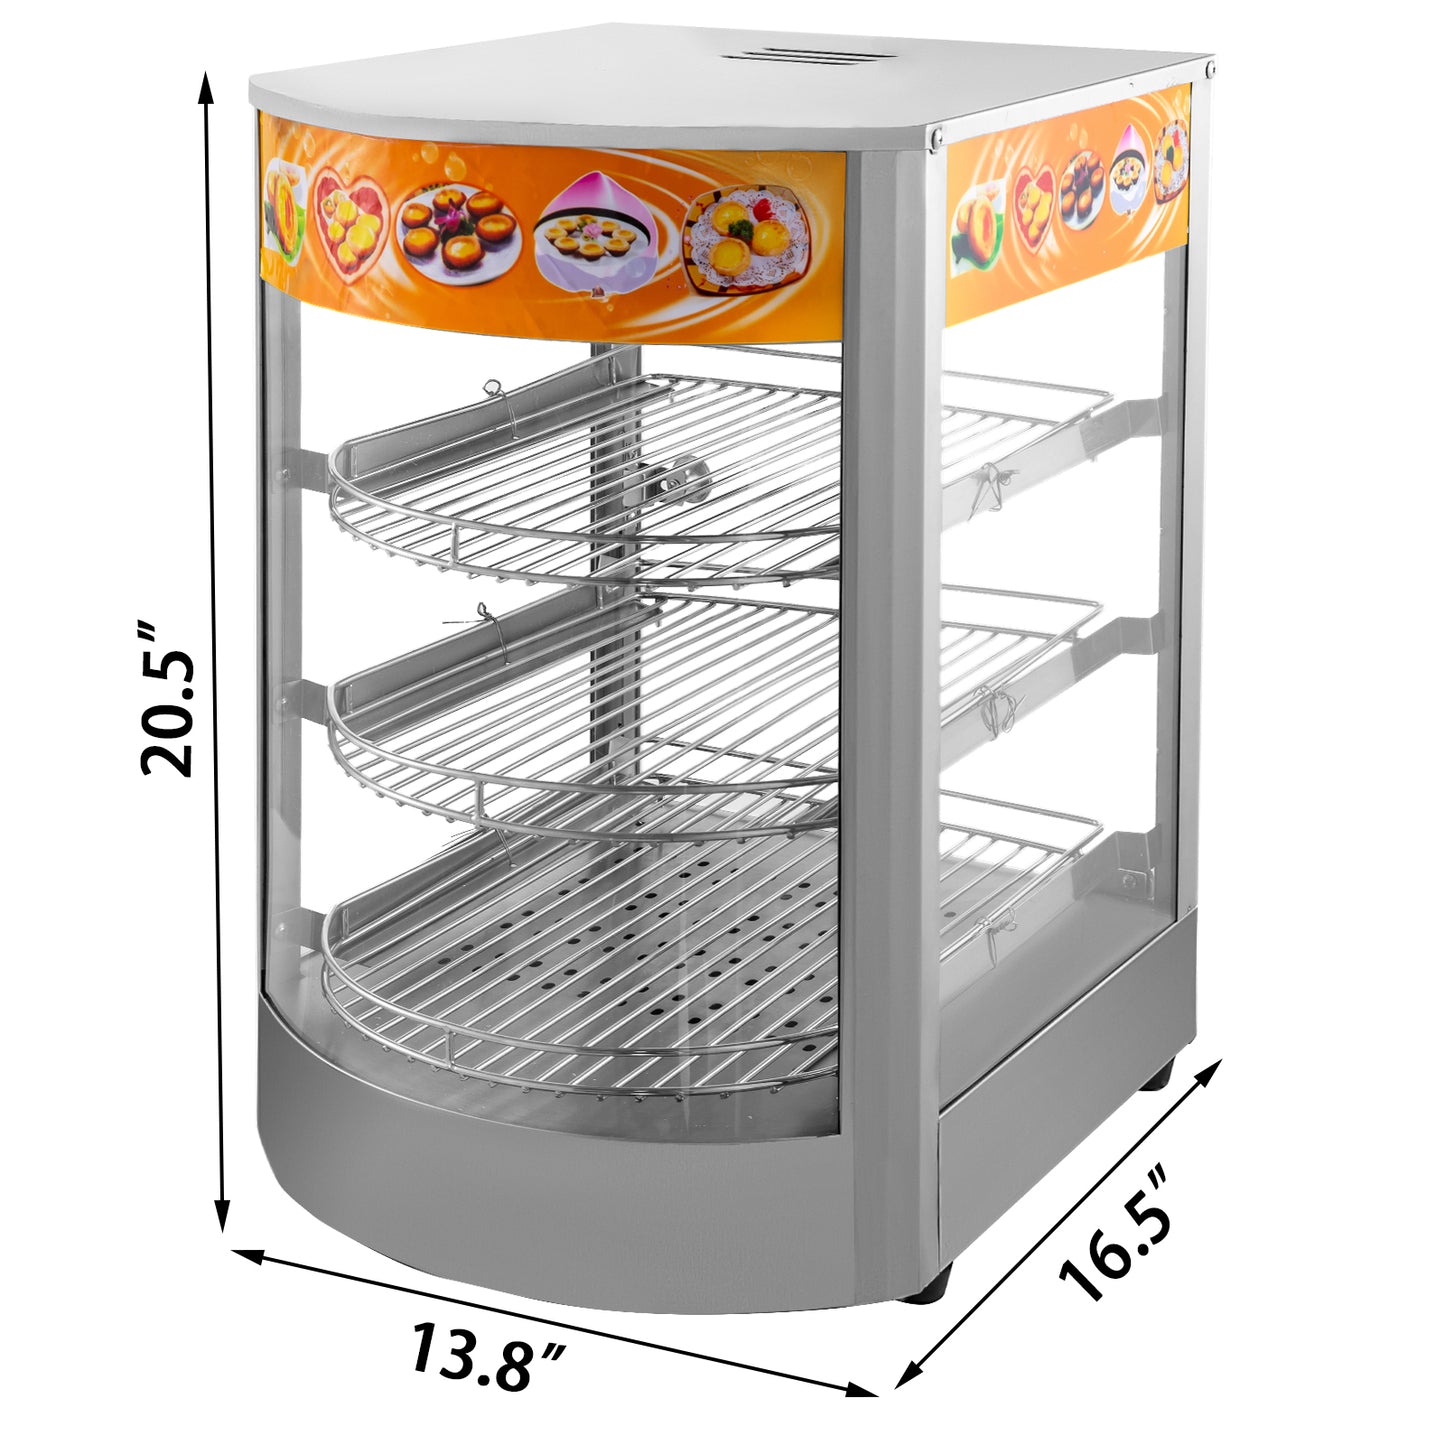 Adjustable Tiered Countertop Food Warmer, Commercial Kitchen Appliance (3/5 Tier)